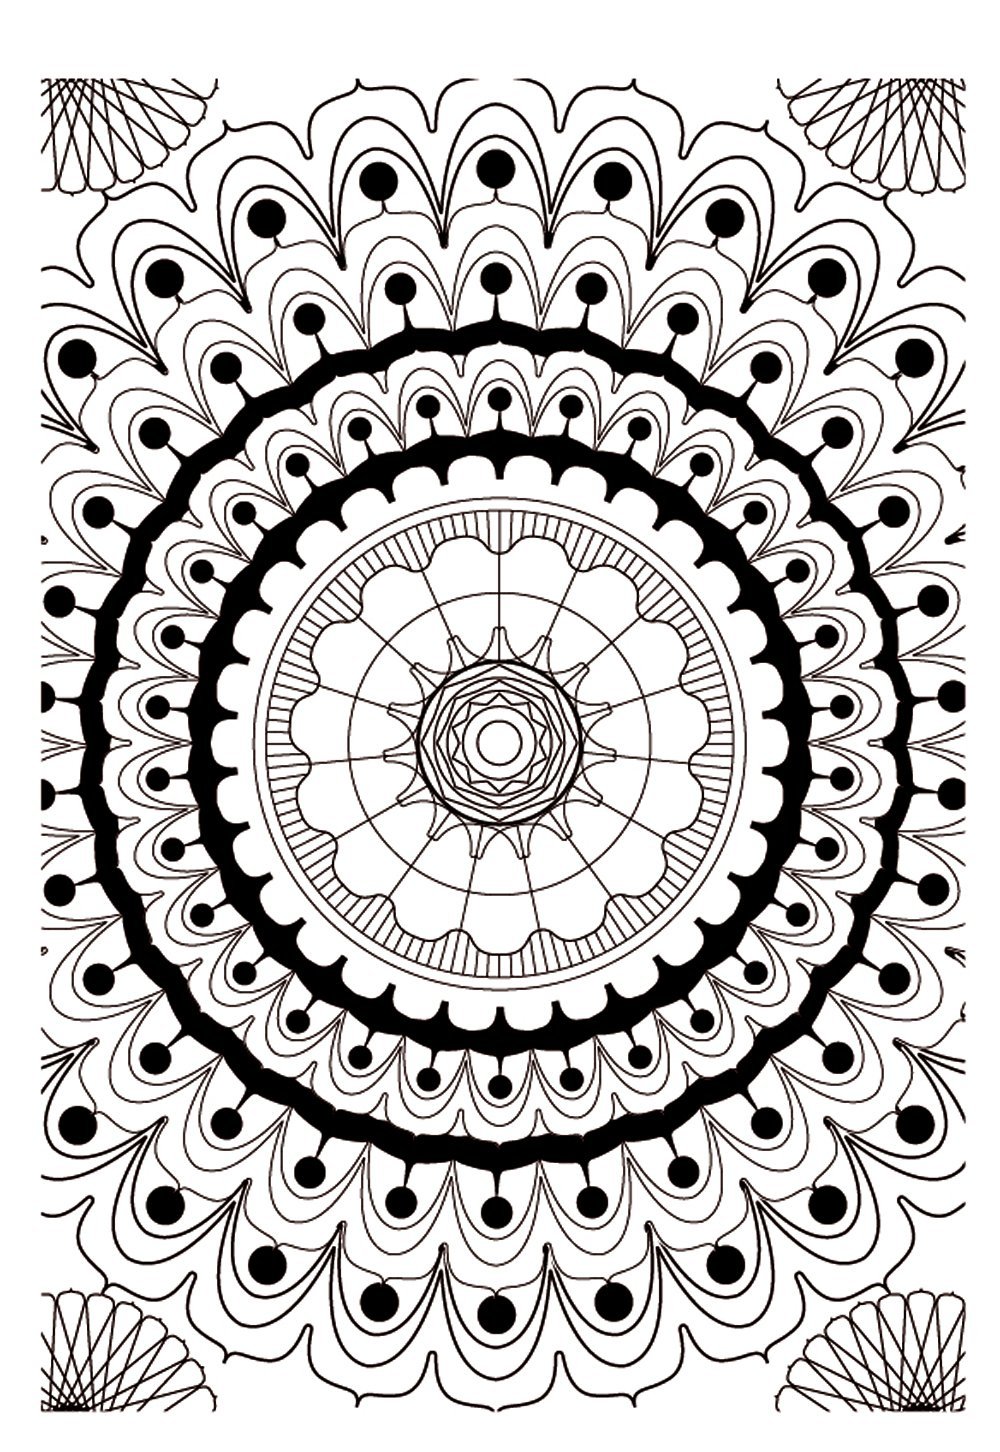 Mandala to color zen relax free (9)